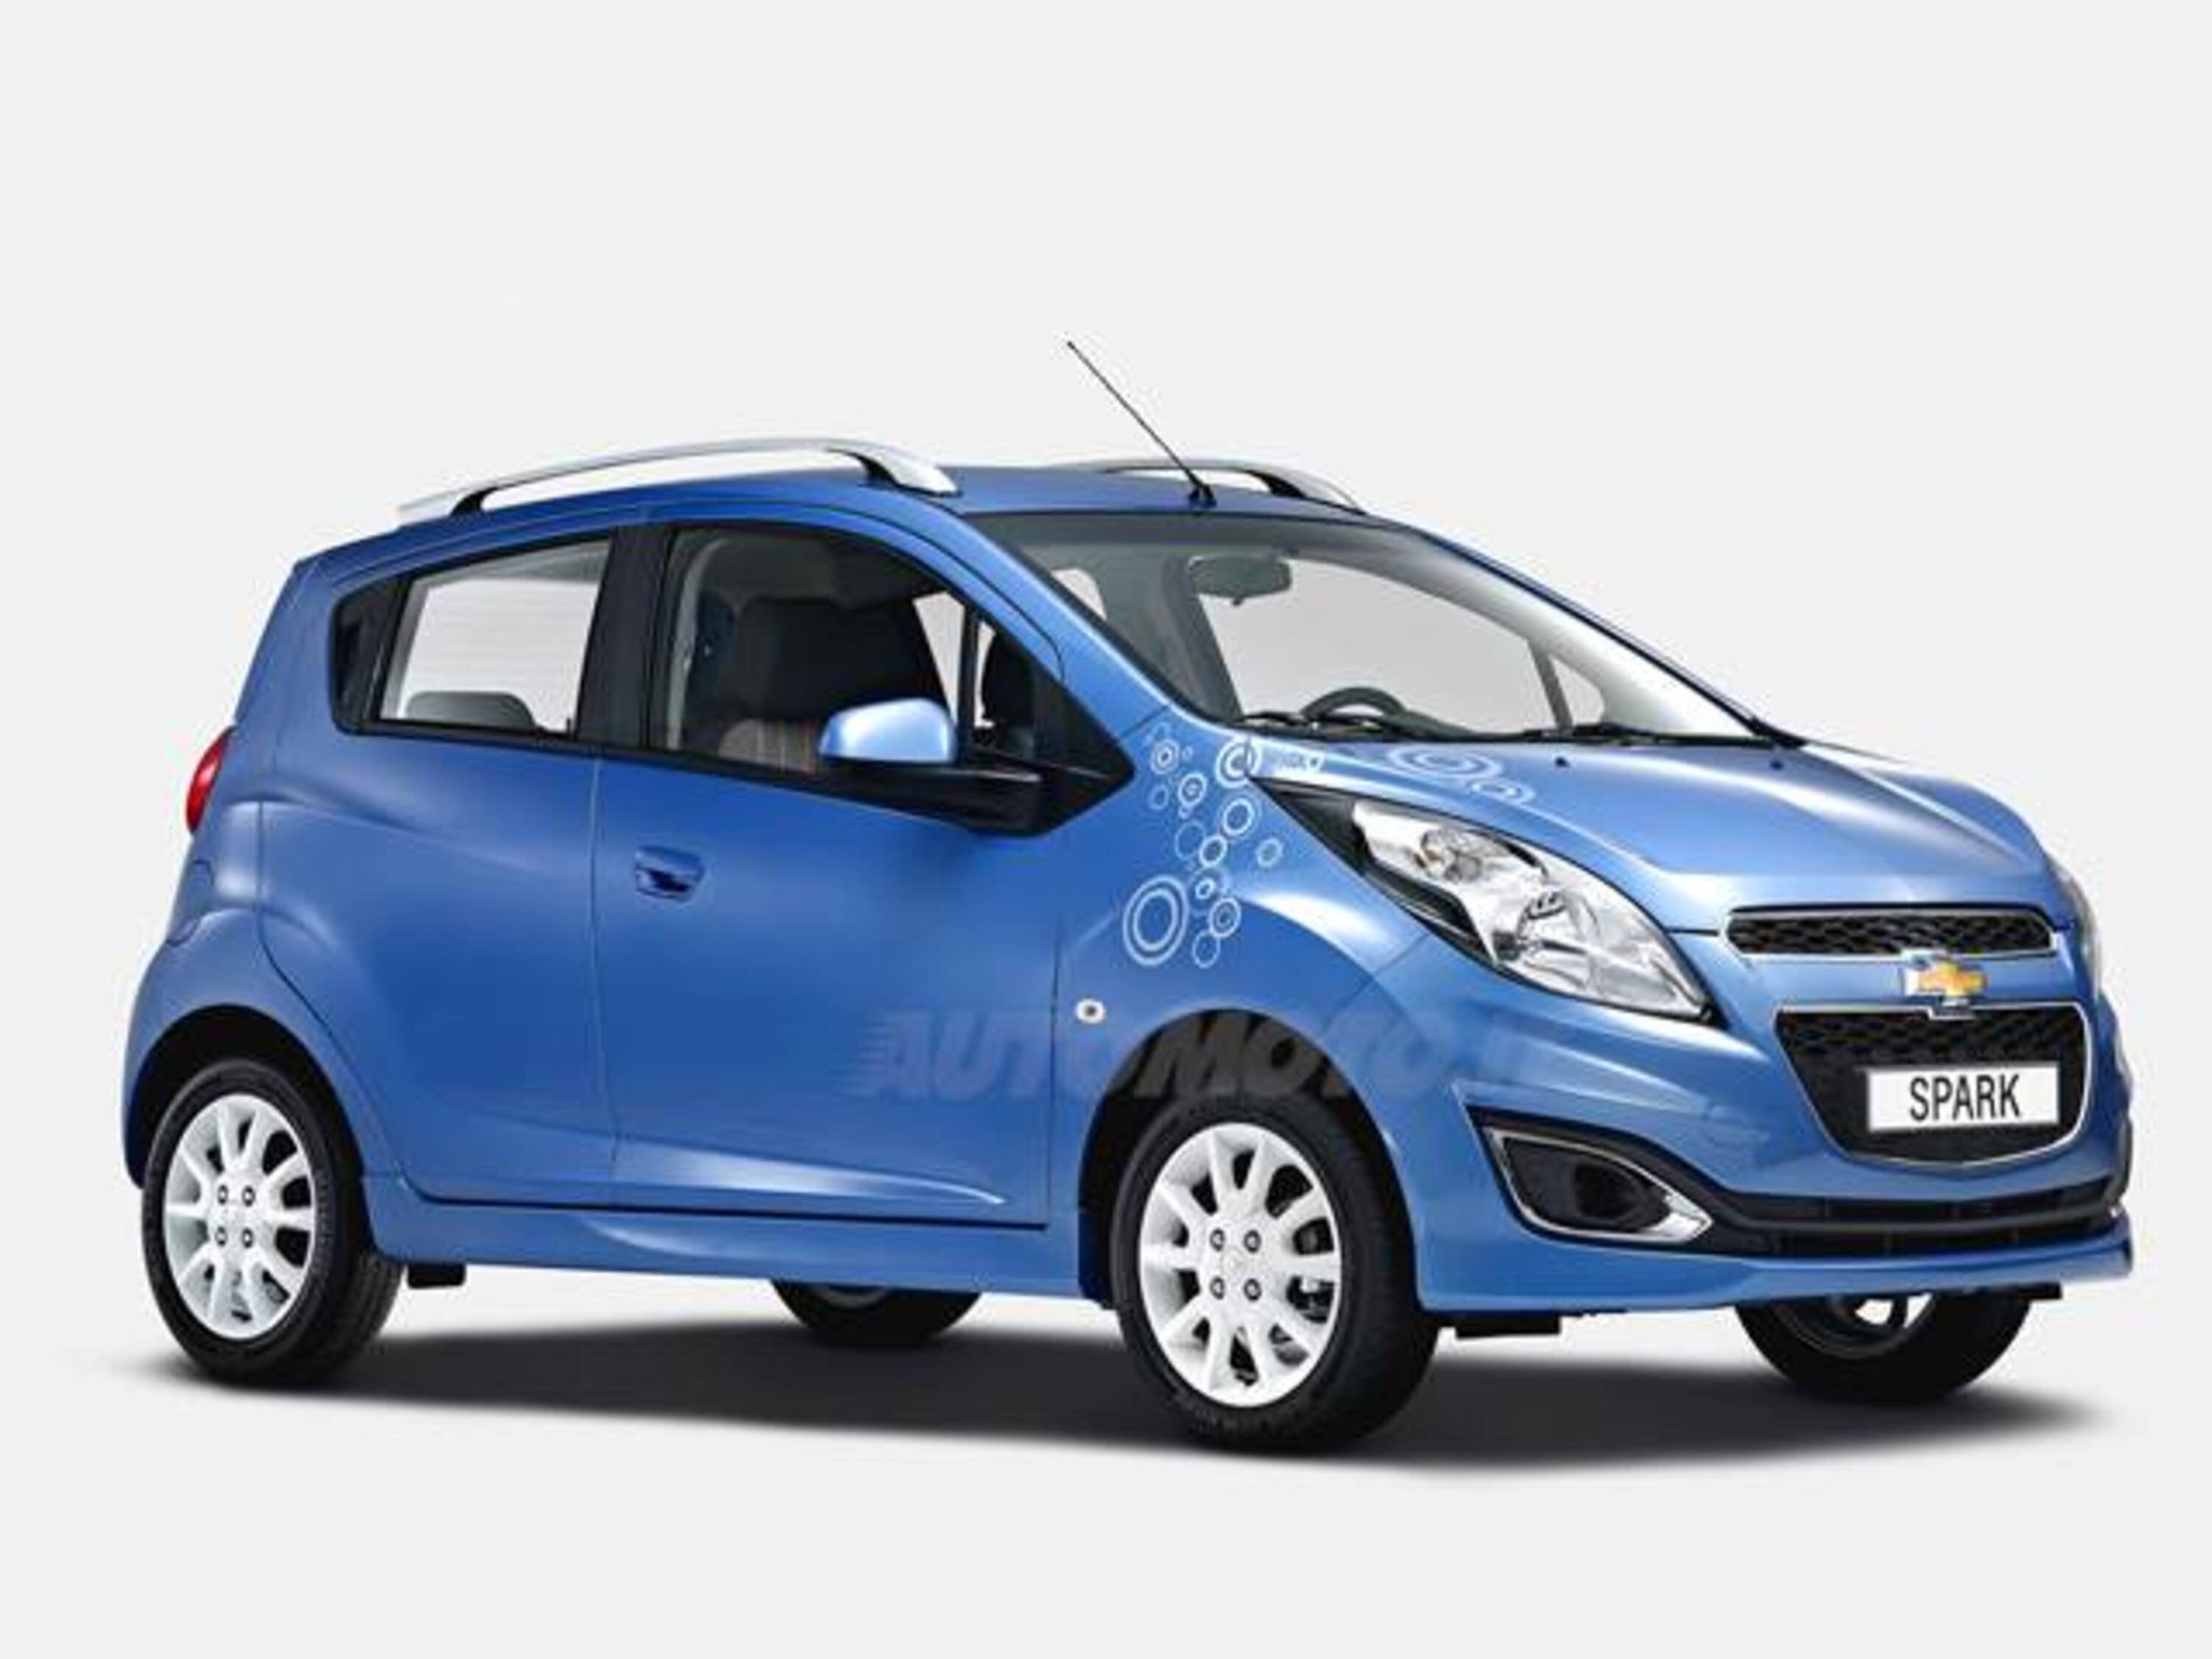 Chevrolet Spark 1.0 Special Edition "Bubble" MY'14